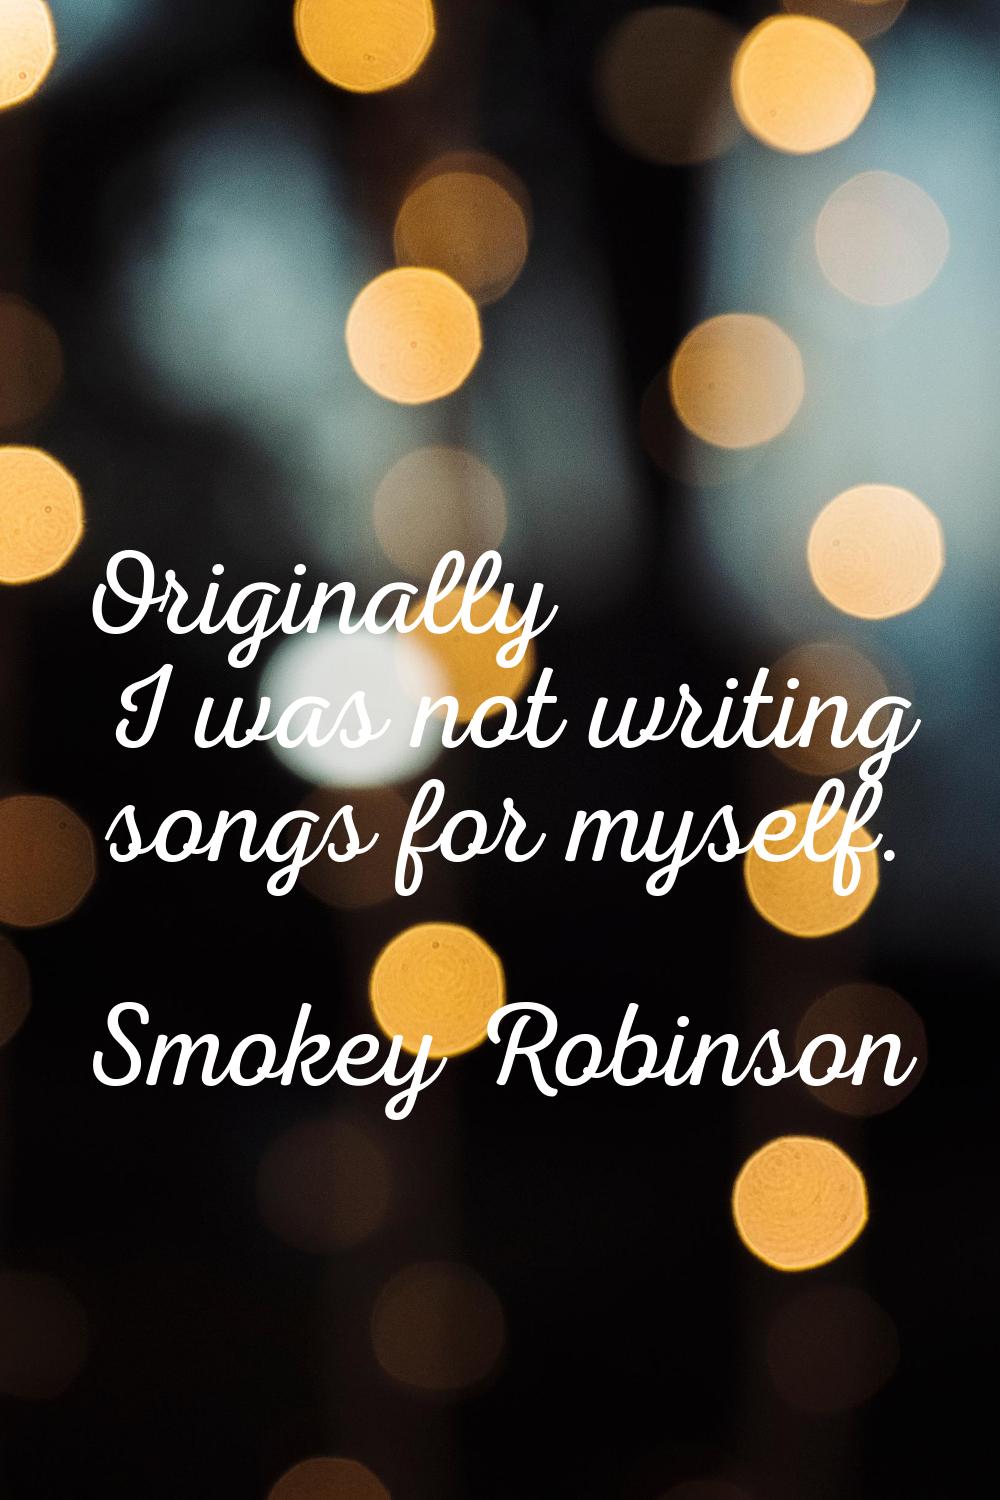 Originally I was not writing songs for myself.